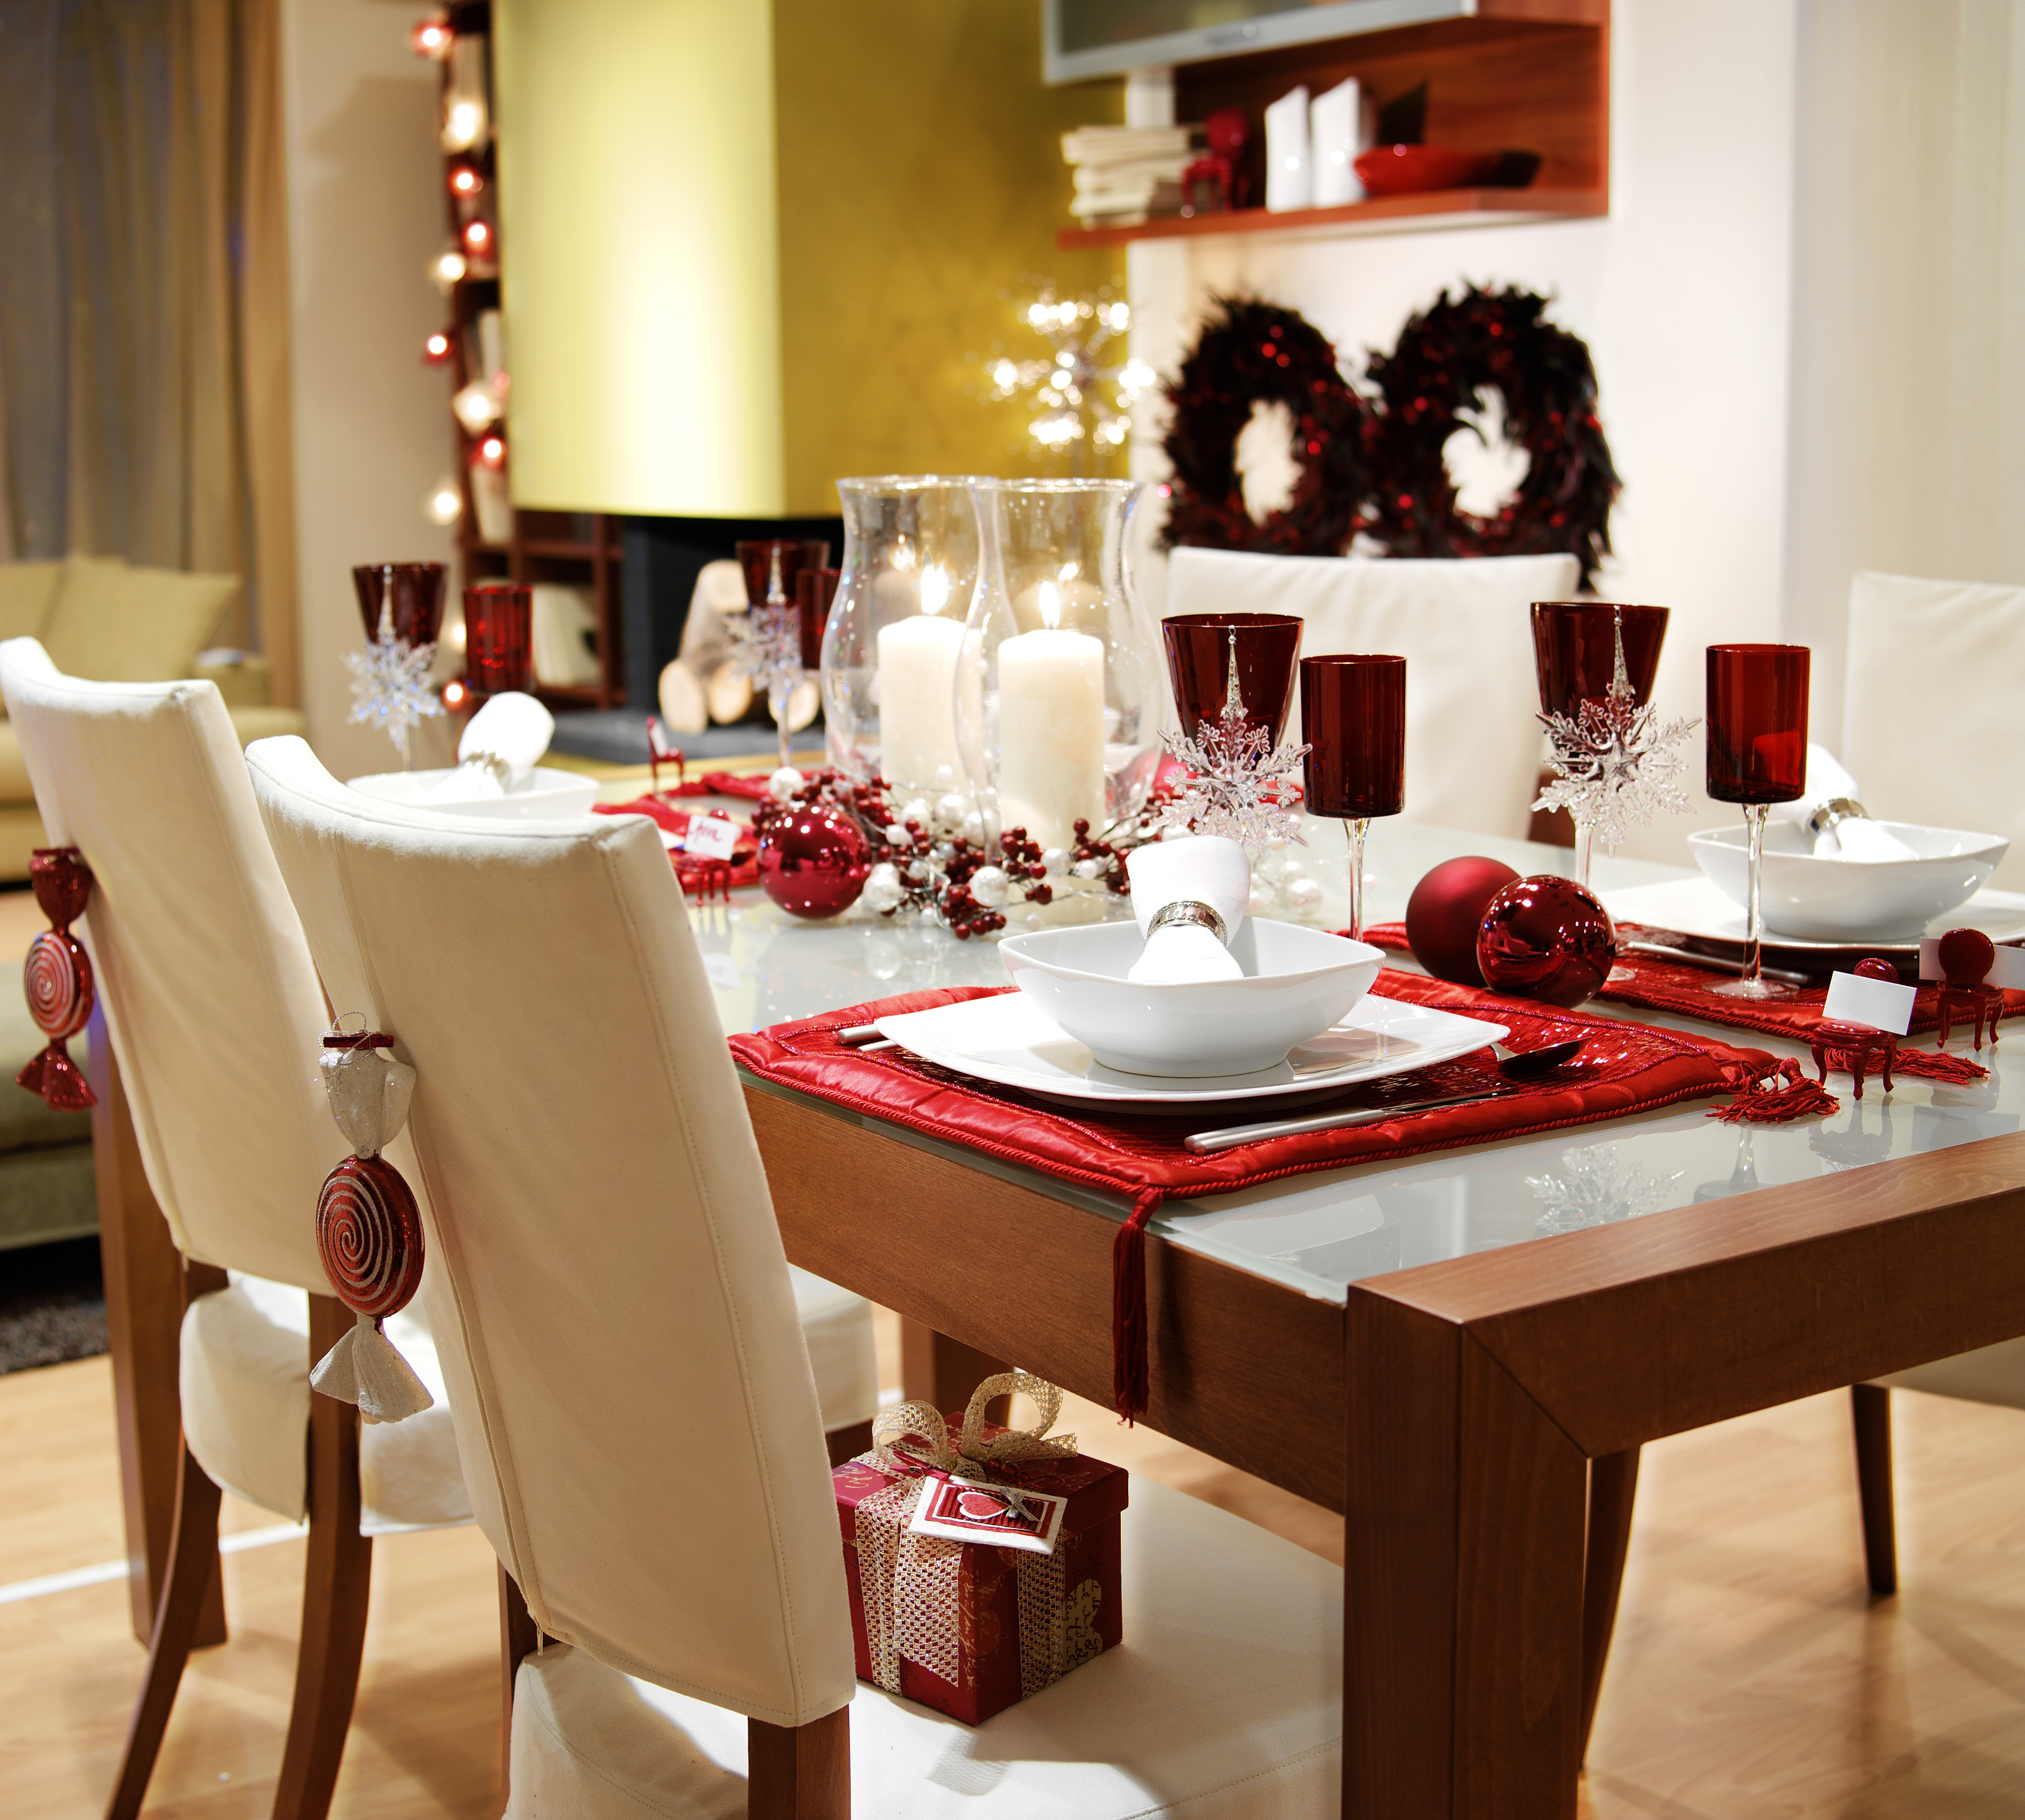 Image: Holiday, Christmas, feast, decorations, interior, gifts, toys